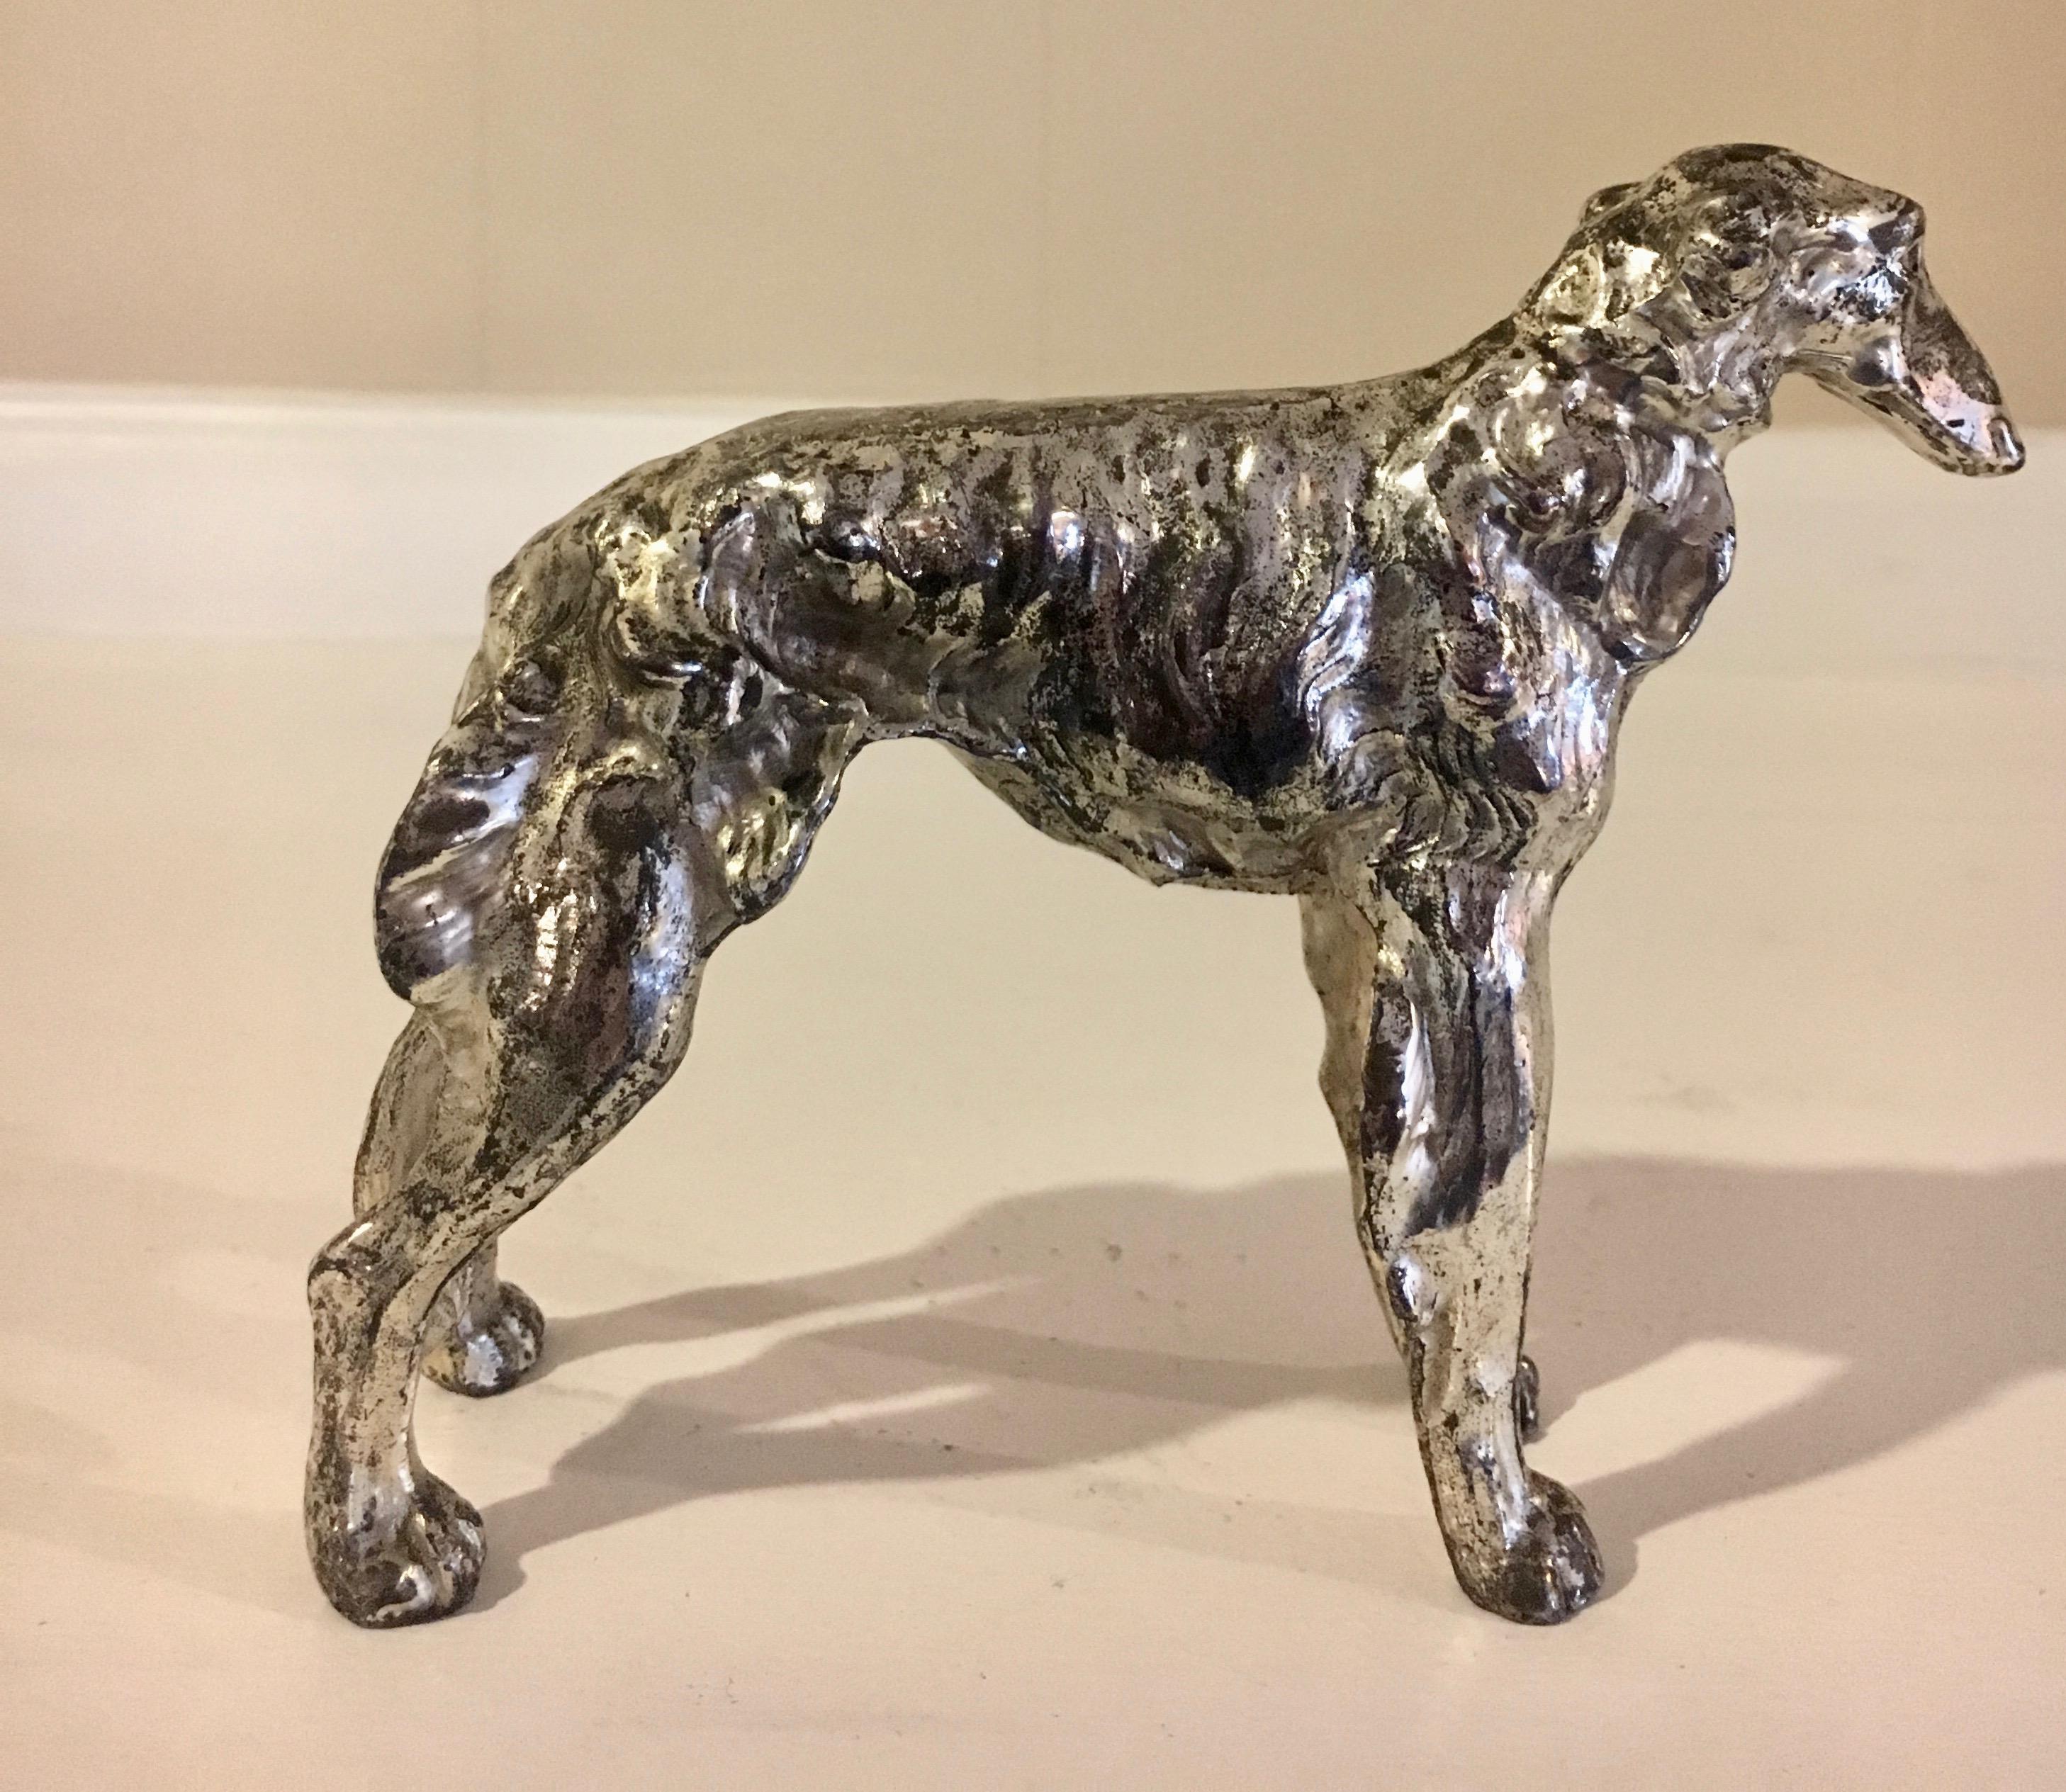 Afghan / Borzoi dog sculpture paper weight - If you are fond of Afghans don't pass this up. A handsome compliment to your desk or shelf in any room. Get your kids a dog that doesn't require walking.

A patinated Silver makes for a lovely finish. The